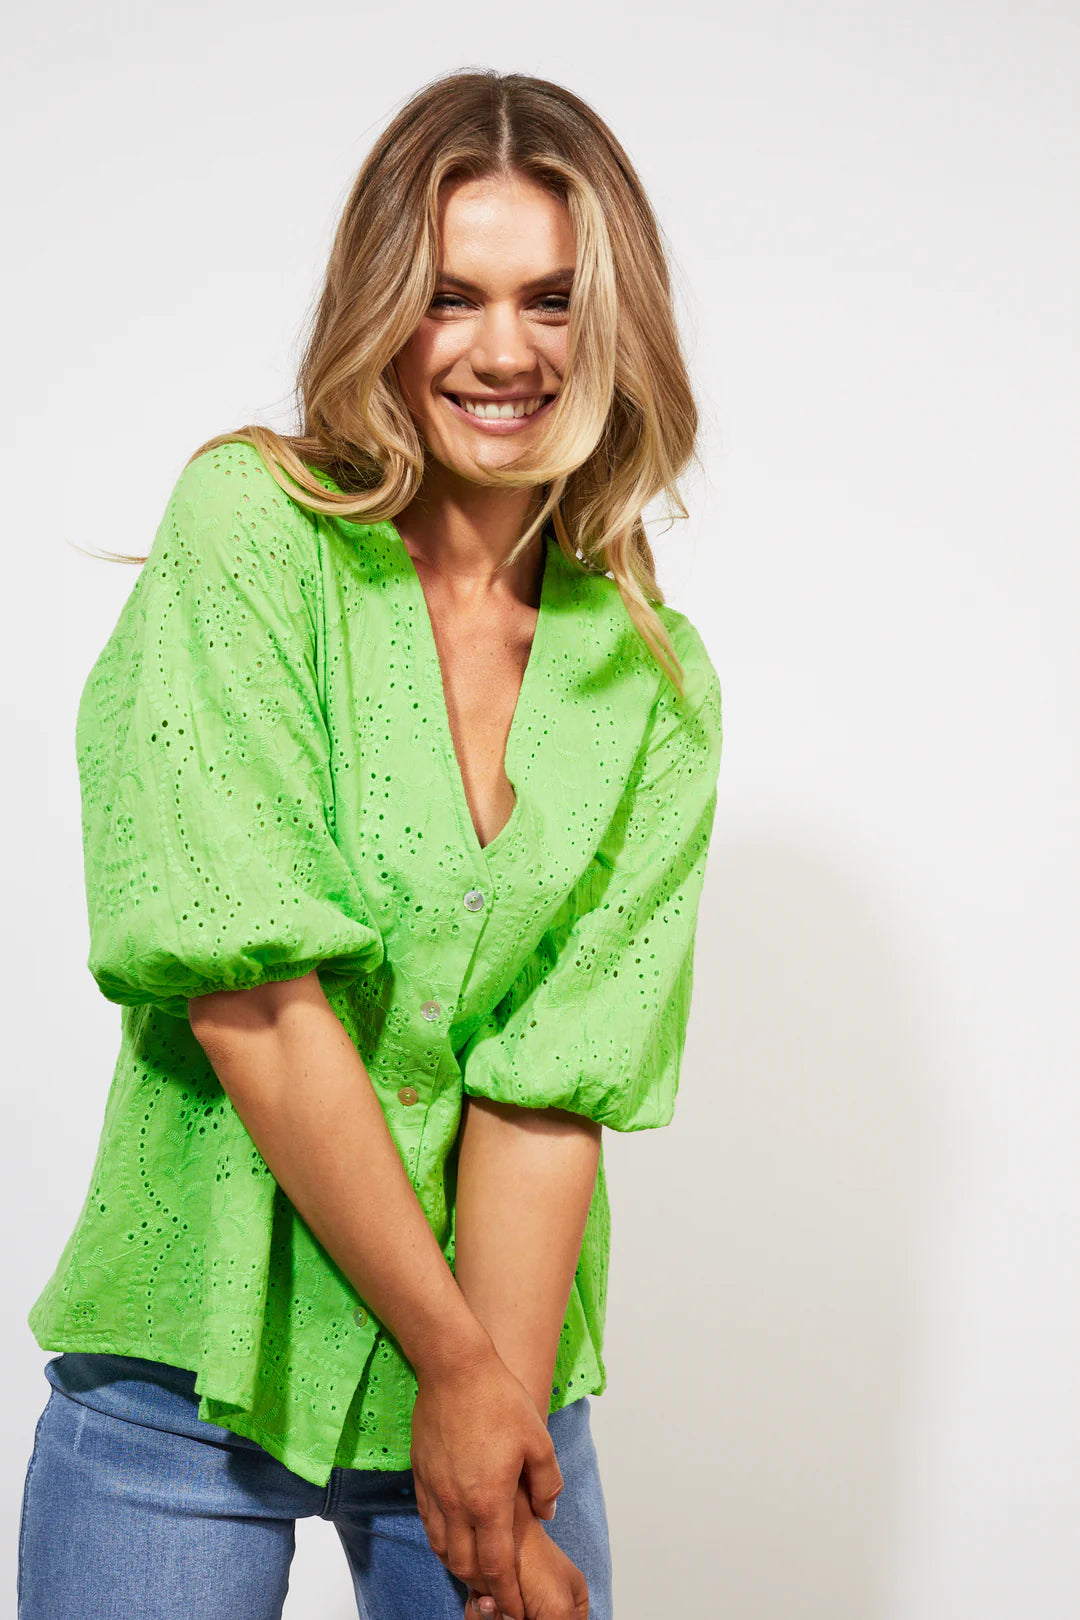 Haven Naxos Blouse In Limeade